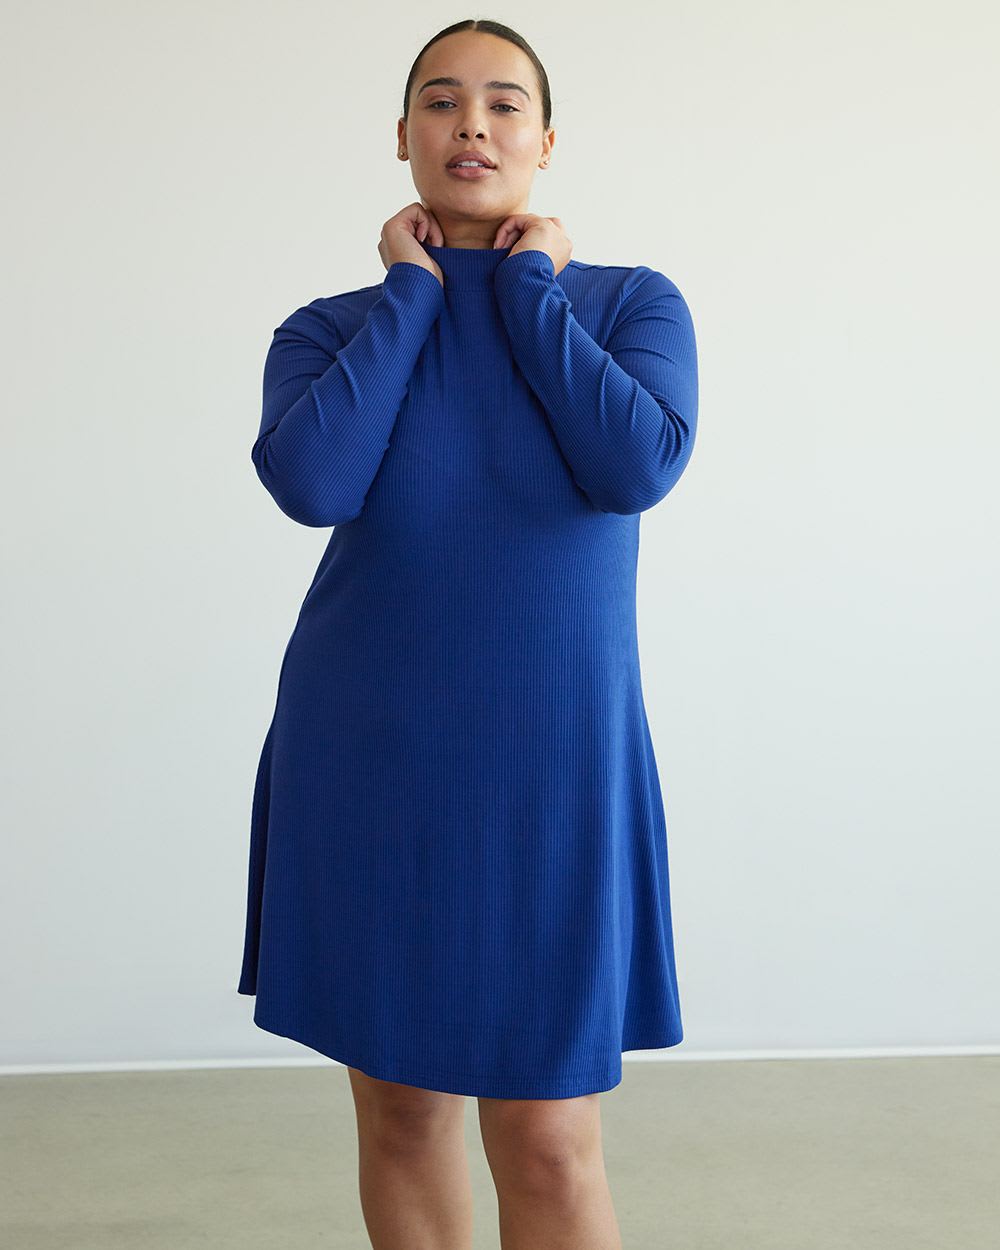 Long-Sleeve Ribbed Swing Dress with Mock Neckline